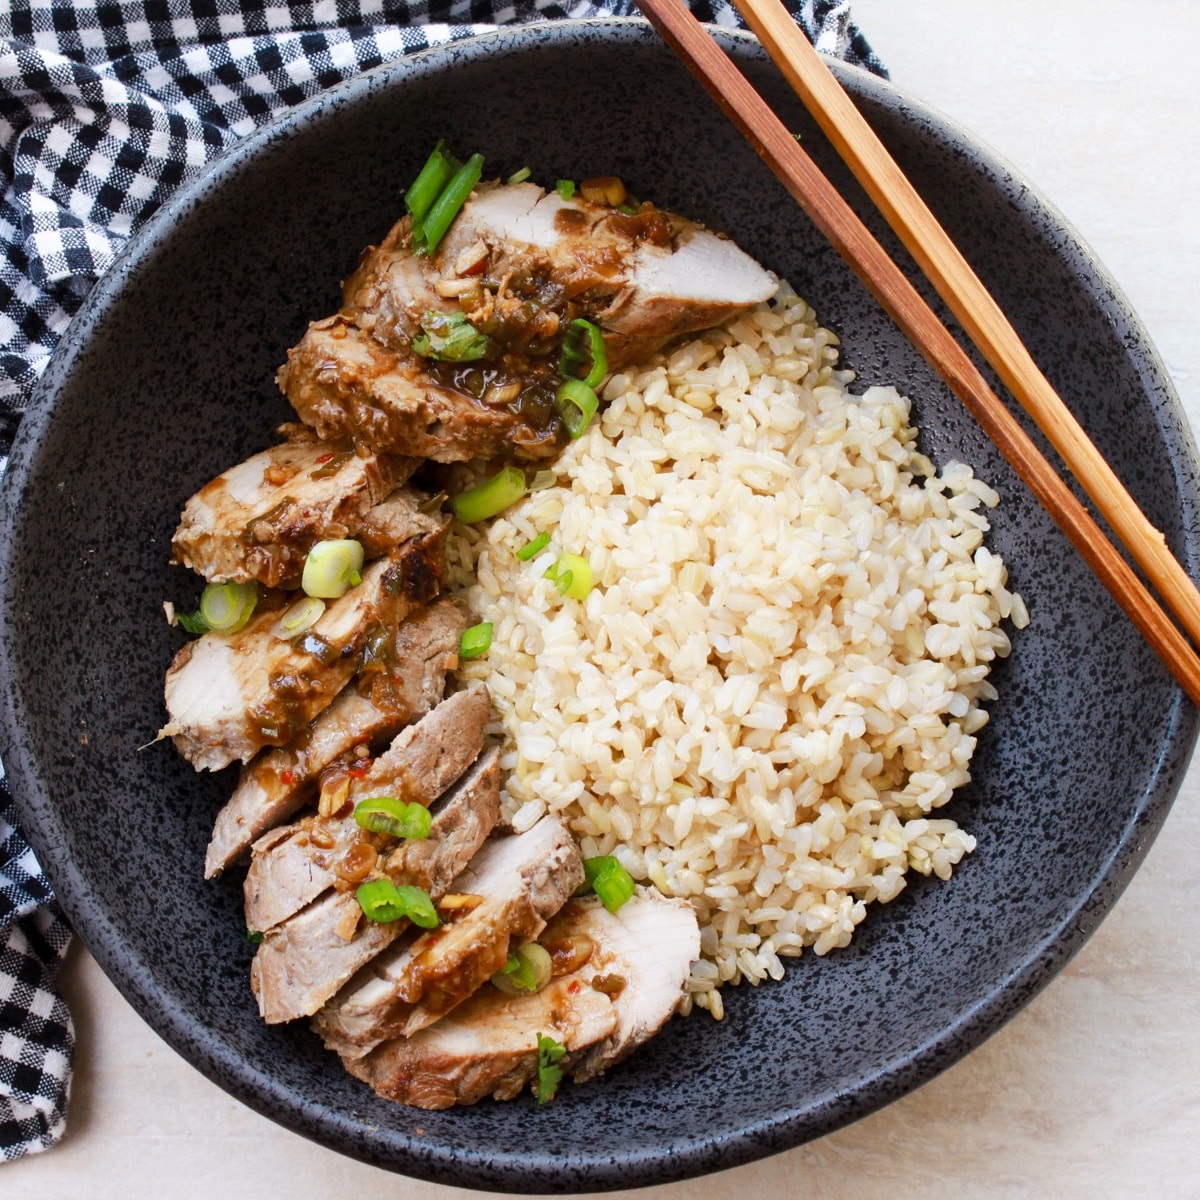 Chinese five spice pork tenderloin slices in a black bowl with brown rice and a pair of chopsticks.